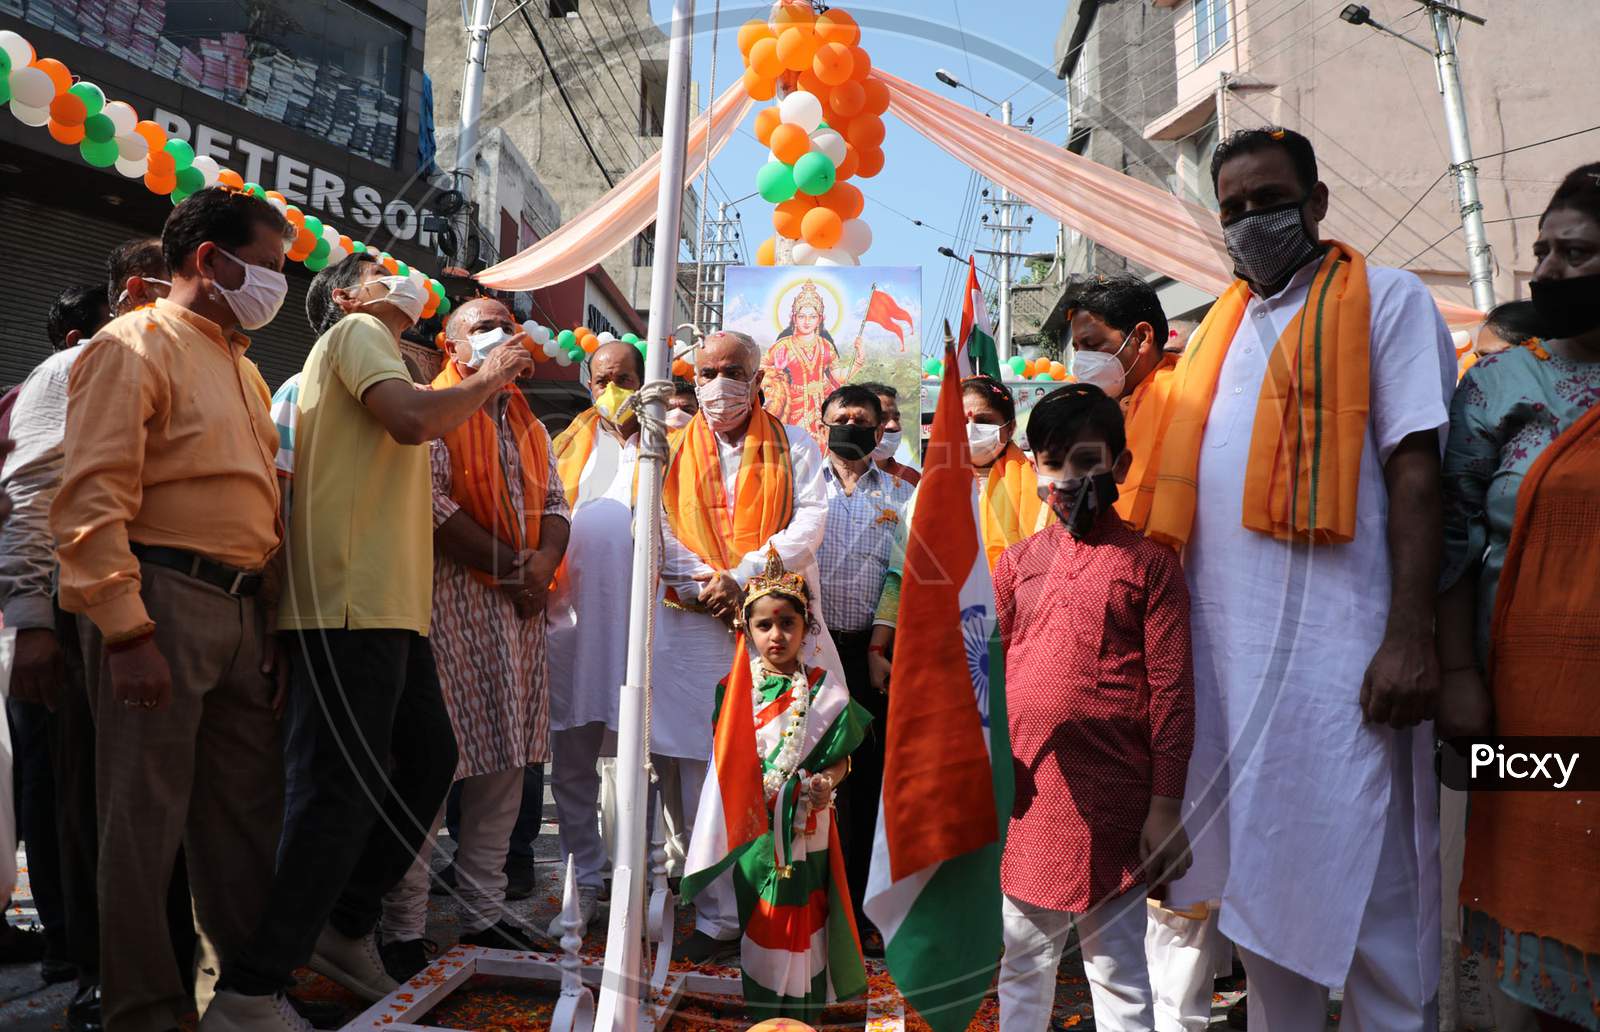 Senior BJP leaders hoist the Tricolor as they celebrate on the first anniversary of revocation of the special status of Jammu and Kashmir, in Jammu on August 5,2020.